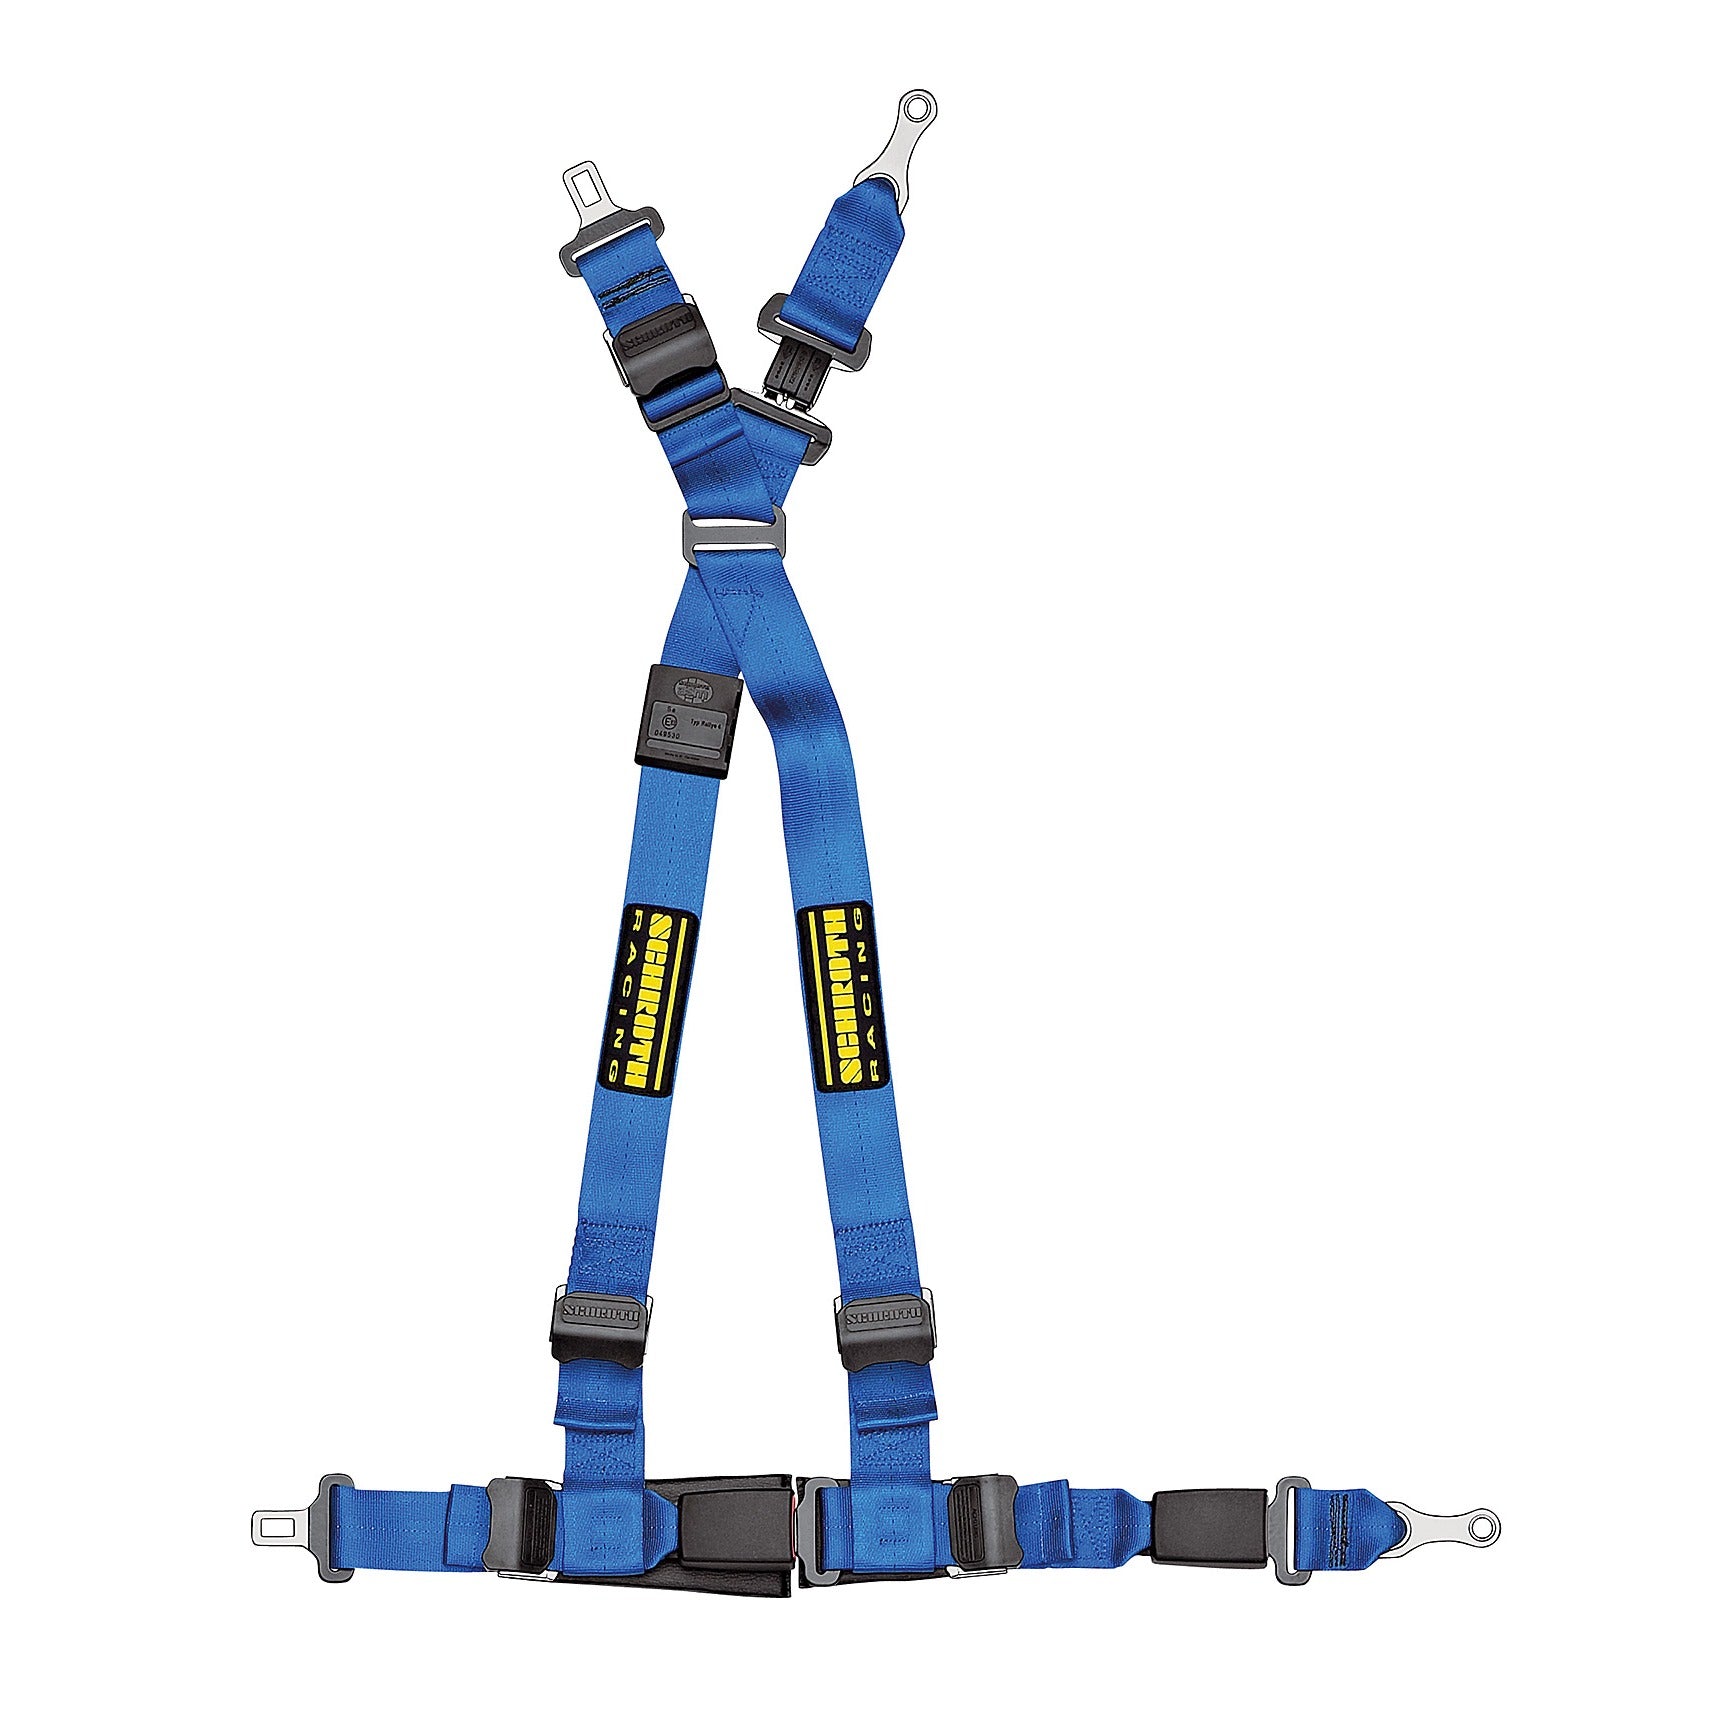 Schroth - Ford Mustang 2005-2017 - Schroth QuickFit Harness Right Side - Blue (2005-2017 Mustangs ONLY)